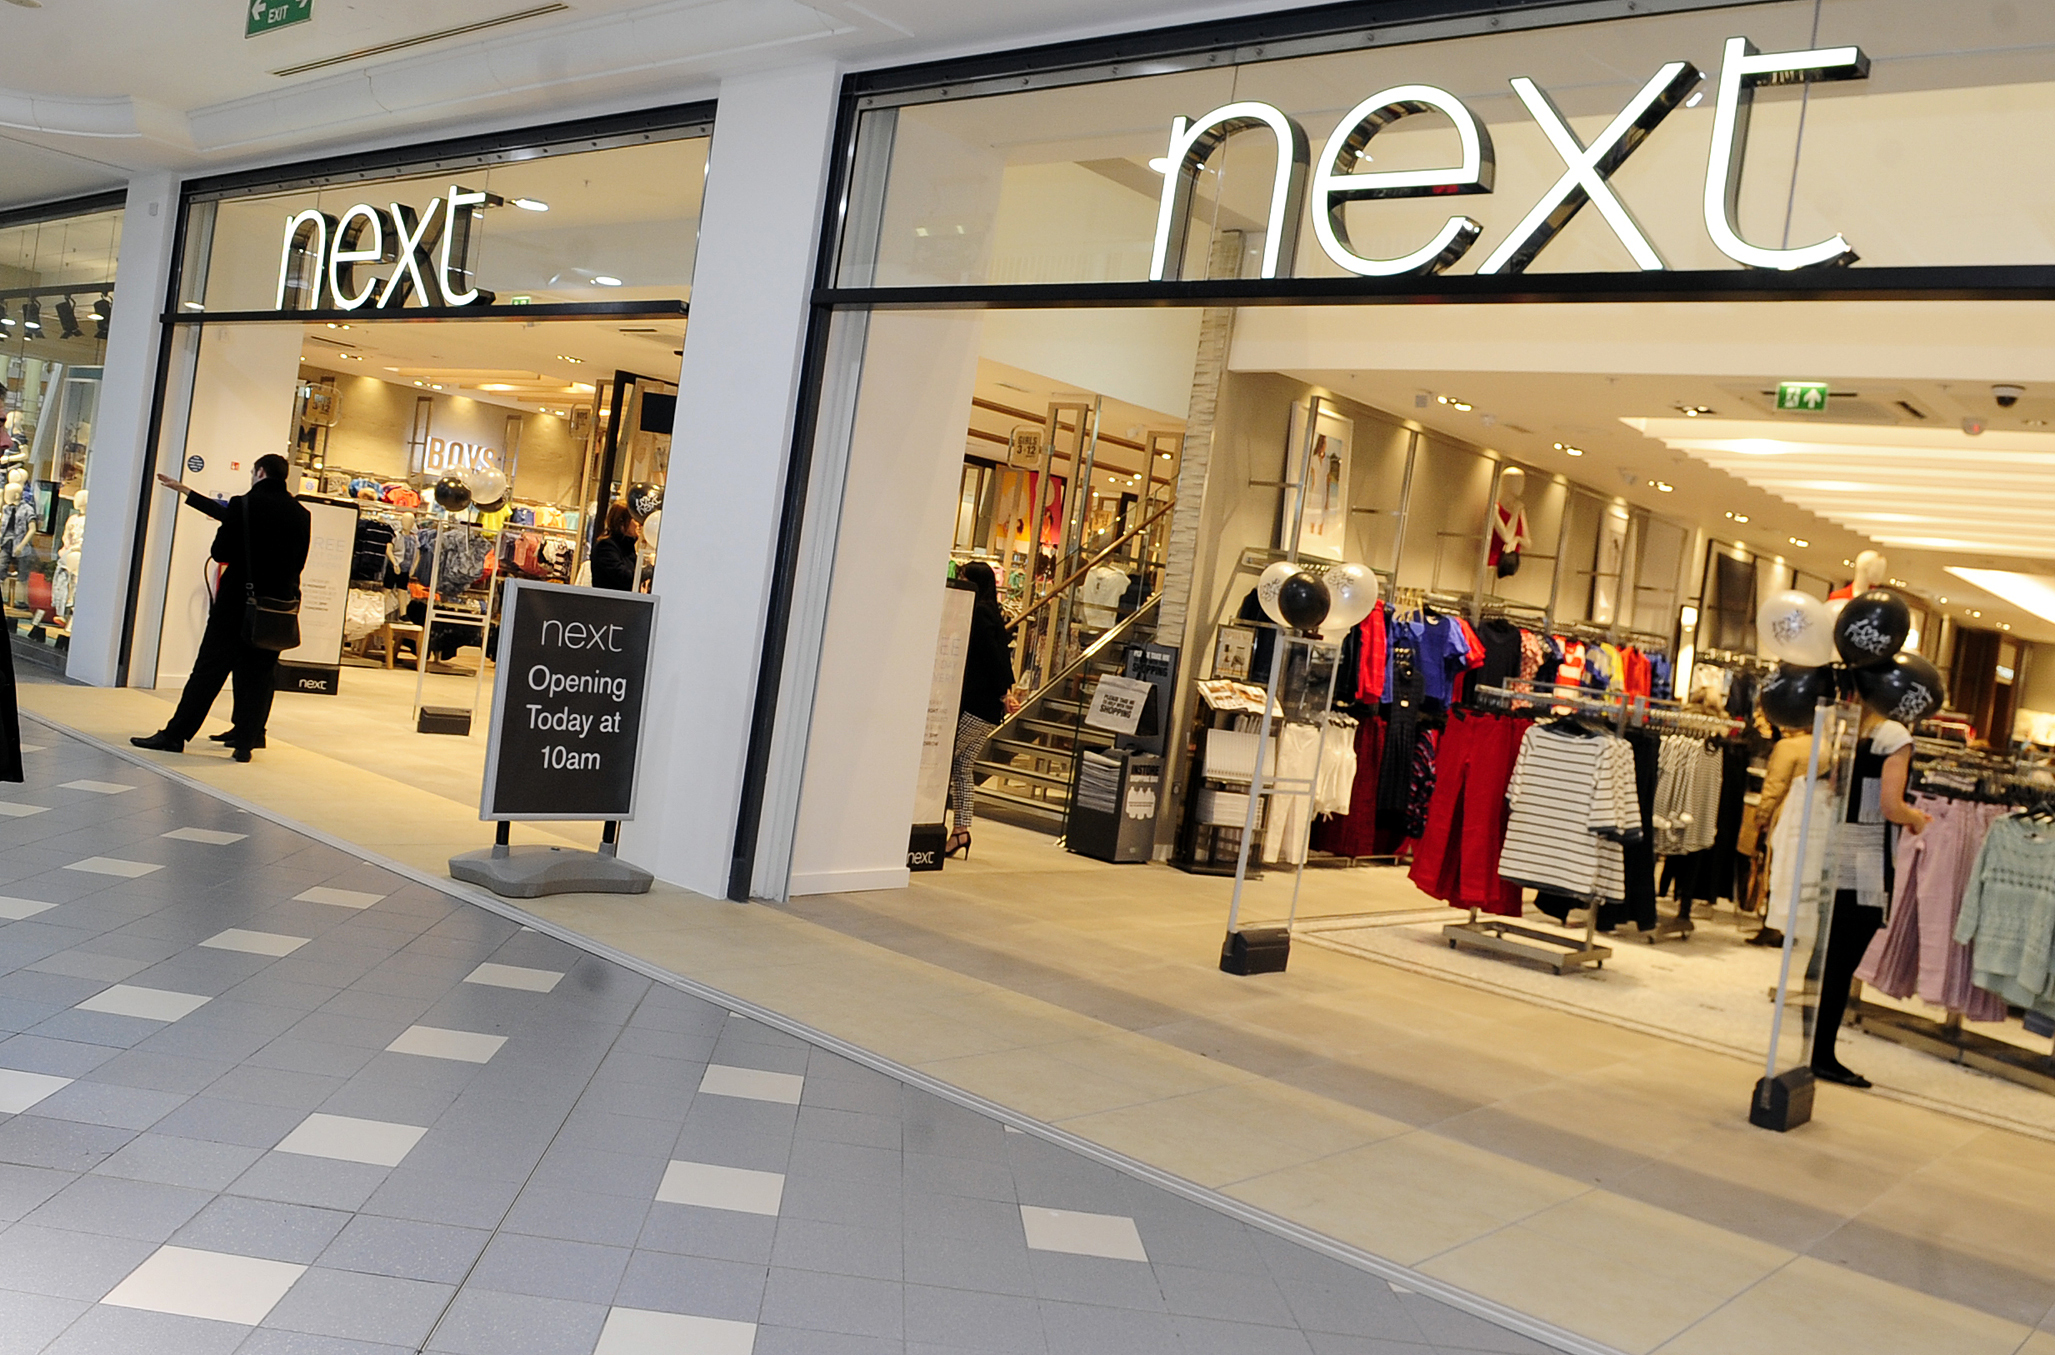 The new Next store which has opened at The Market Place, Bolton. Photo by Nigel Taggart, Newsquest (Bolton) Ltd, Thursday March 19, 2015